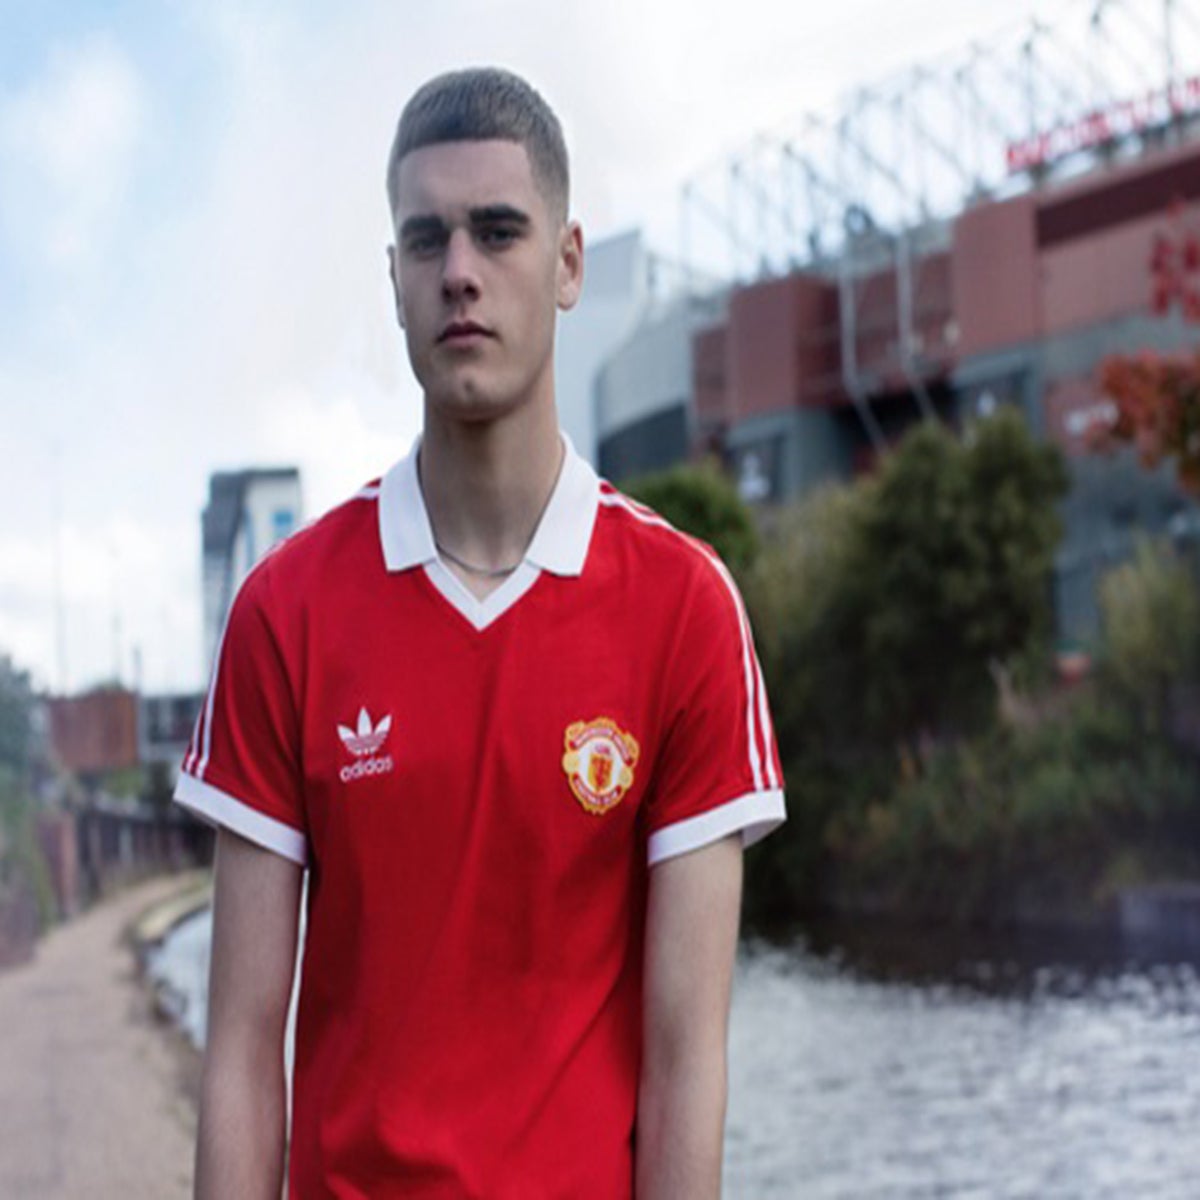 Manchester United kit: Adidas Originals launch retro United inspired by 1985 FA Cup triumph | The Independent | The Independent